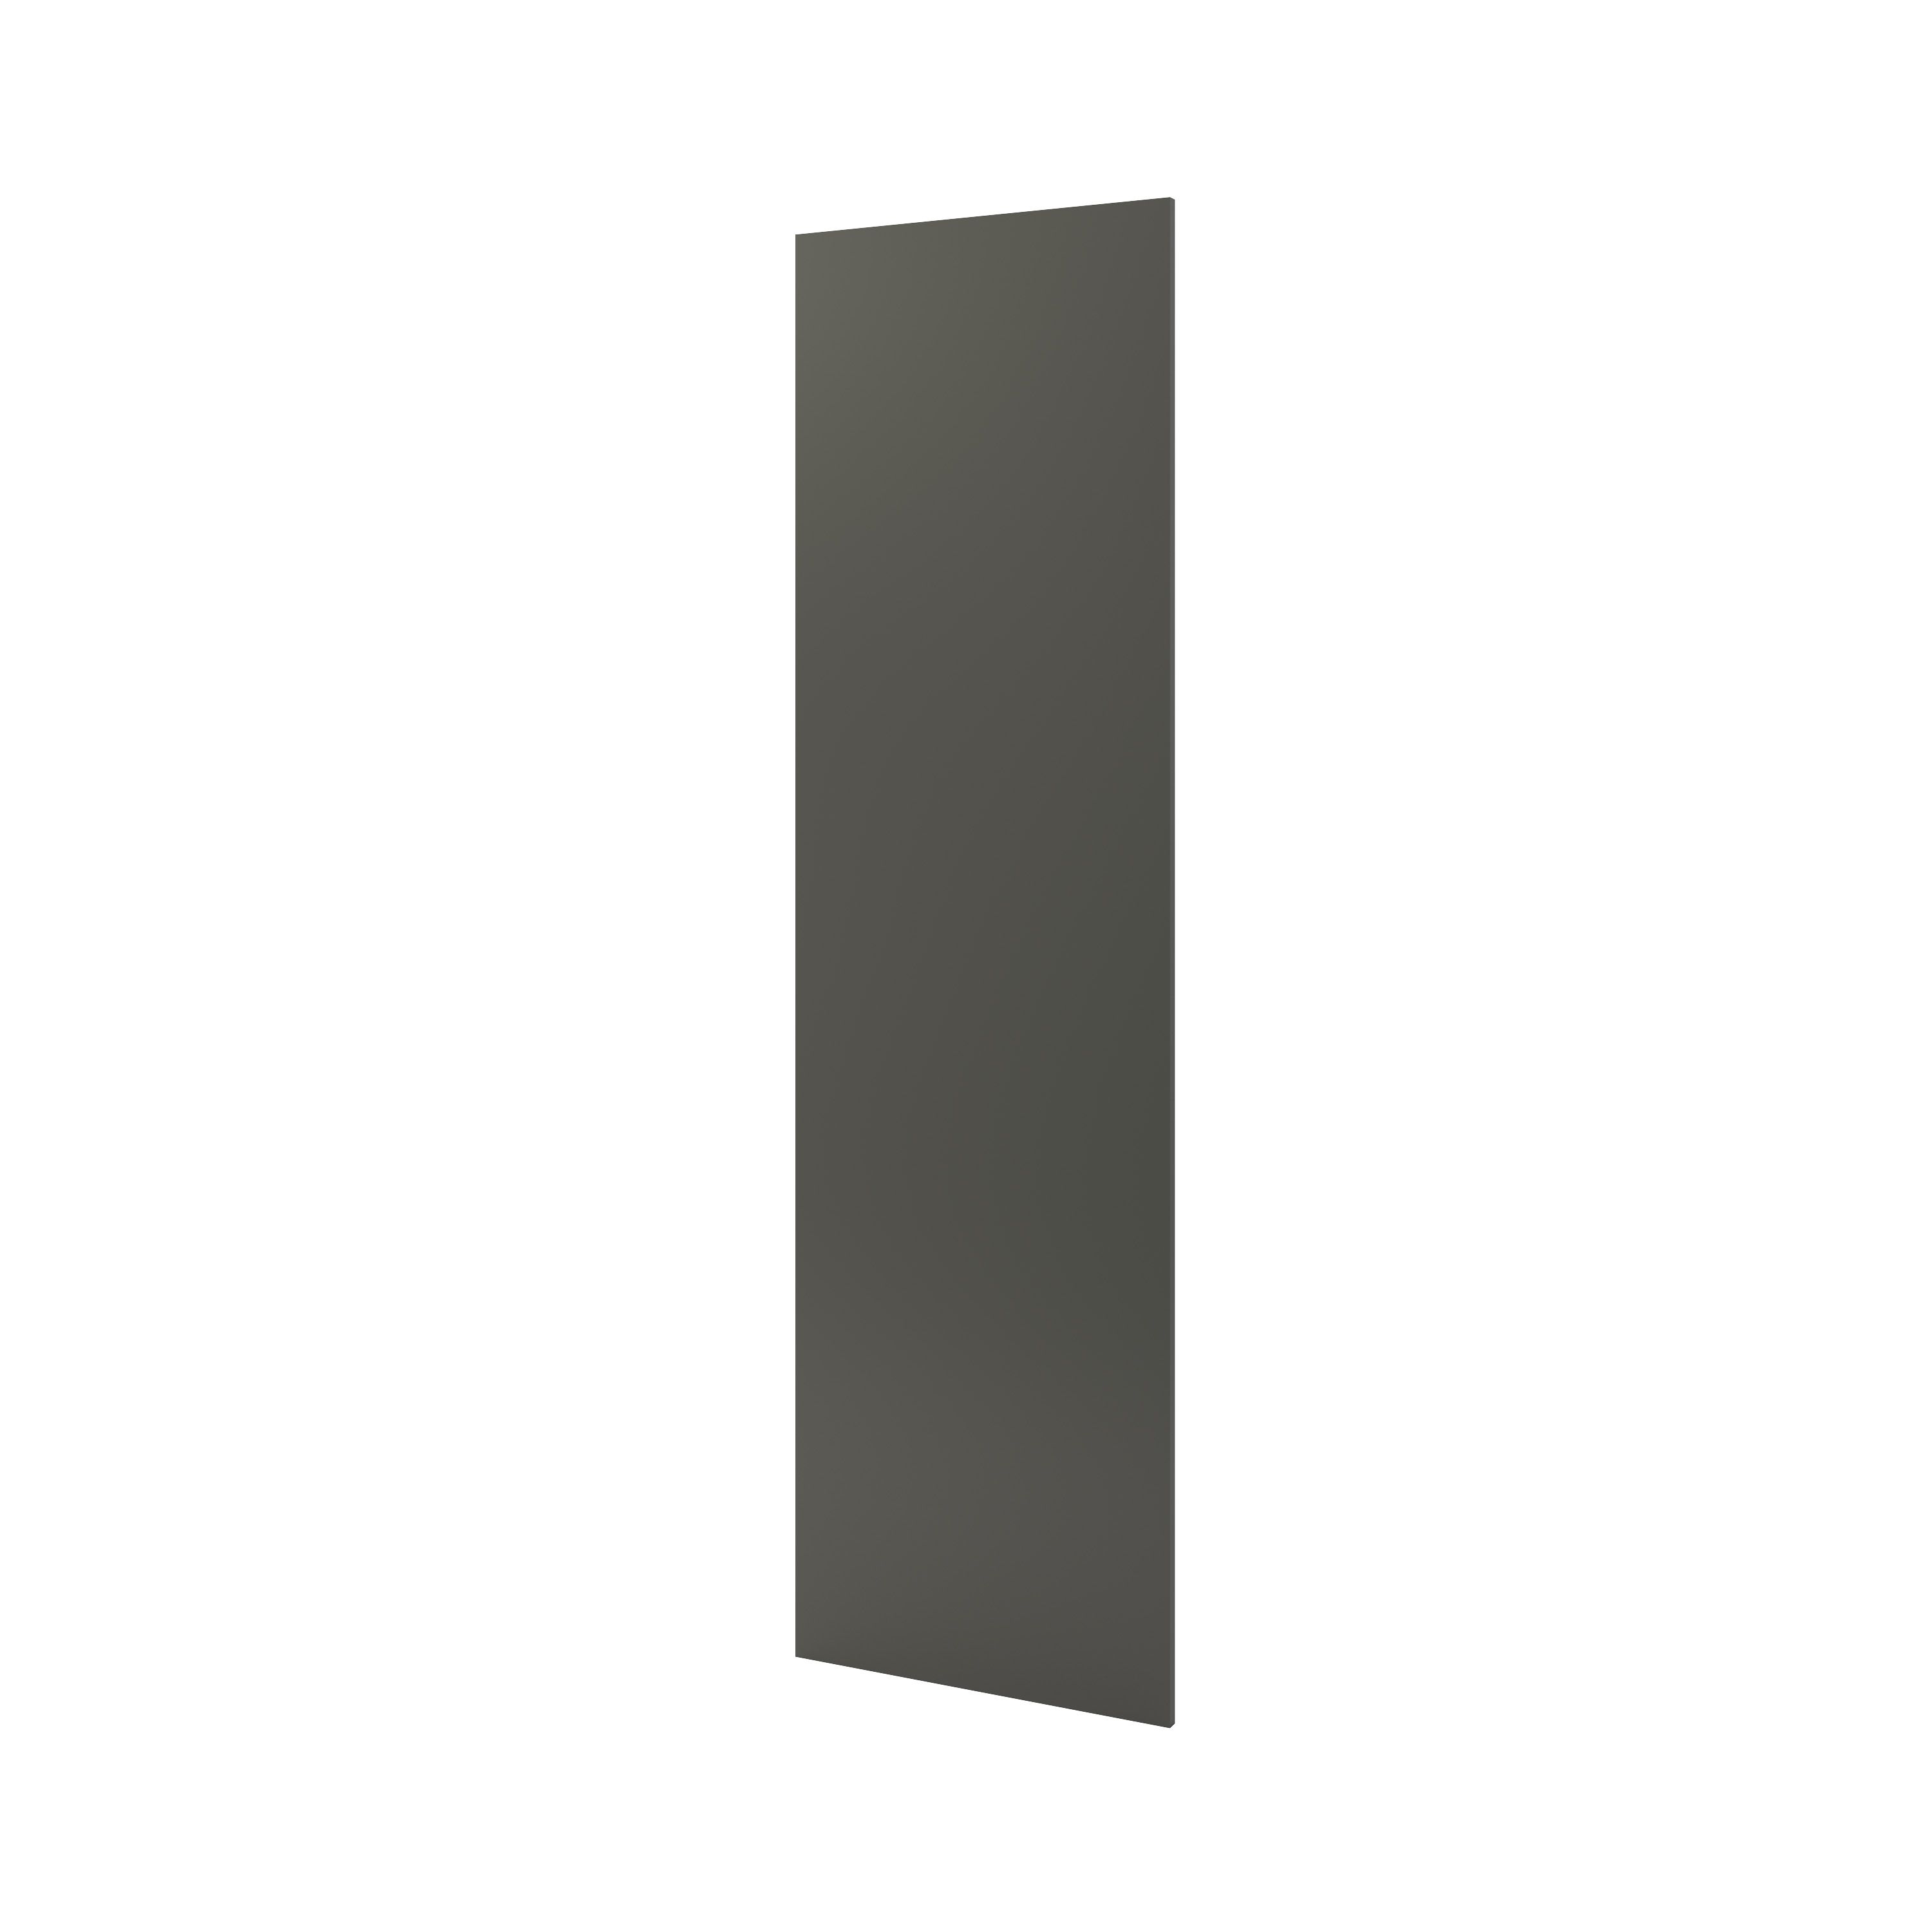 GoodHome Stevia & Garcinia Gloss anthracite slab Standard End panel (H)2010mm (W)570mm, Pair